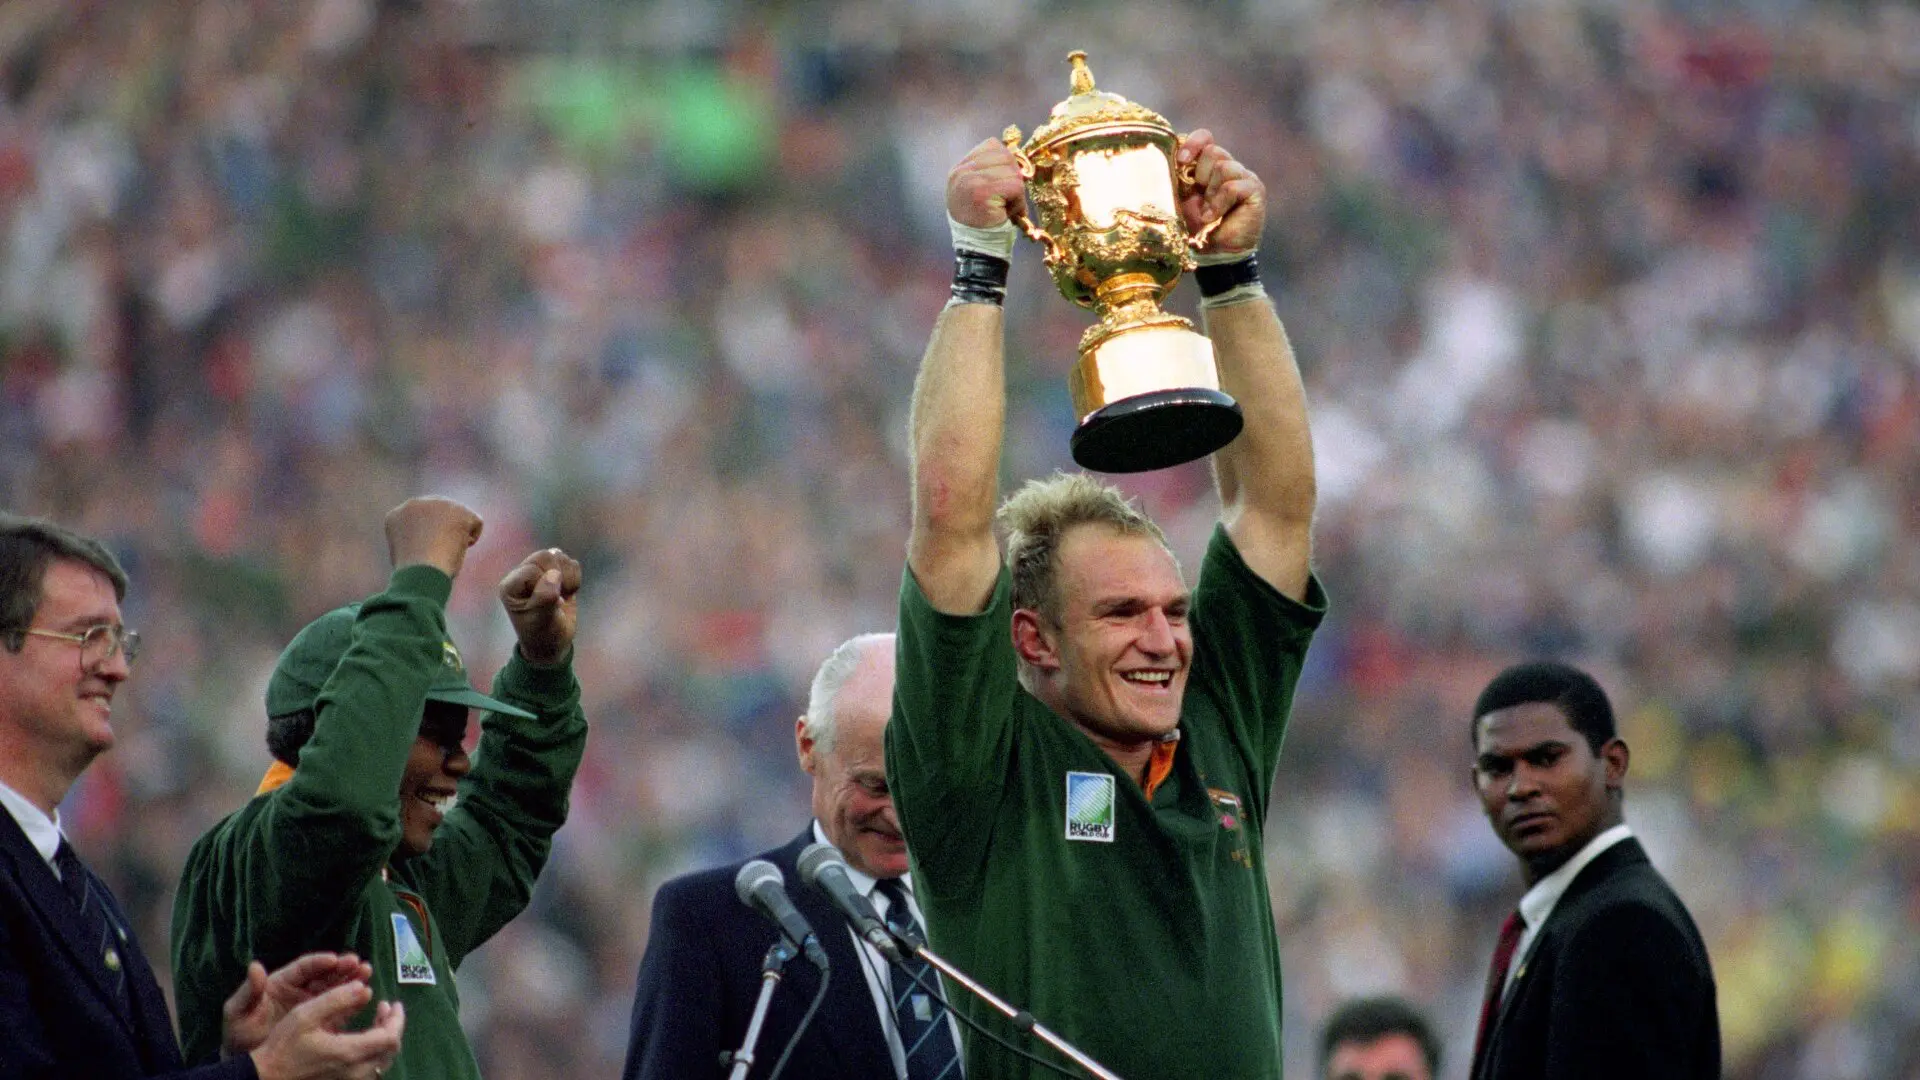 1995: World Cup win on home soil